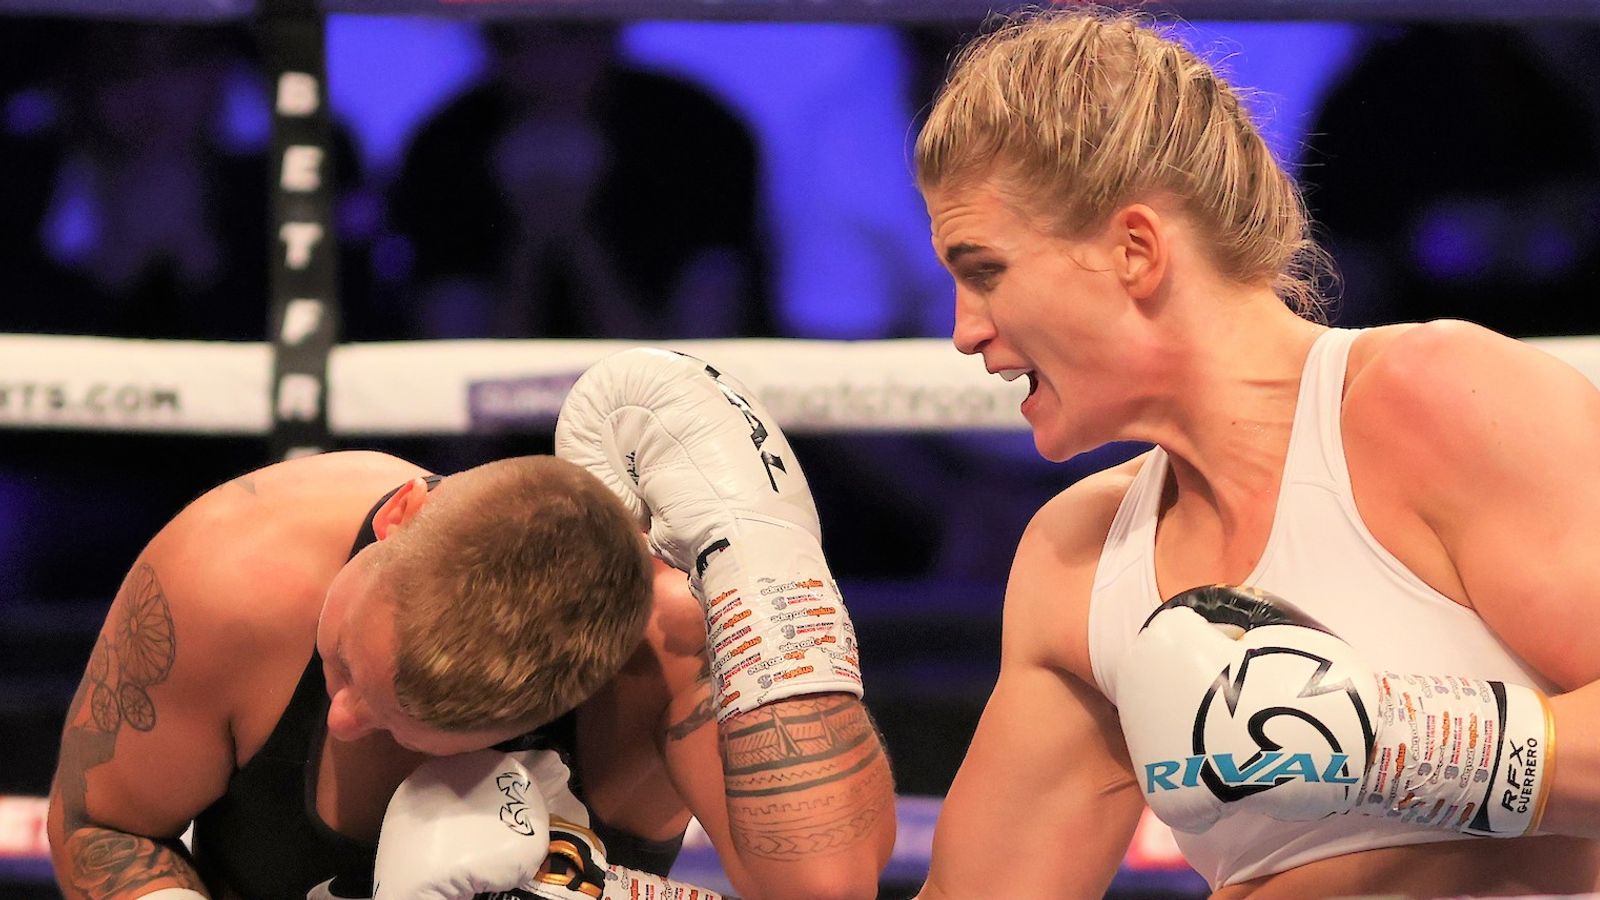 April Hunter defeats Klaudia Vigh on points to seal fourth professional victory